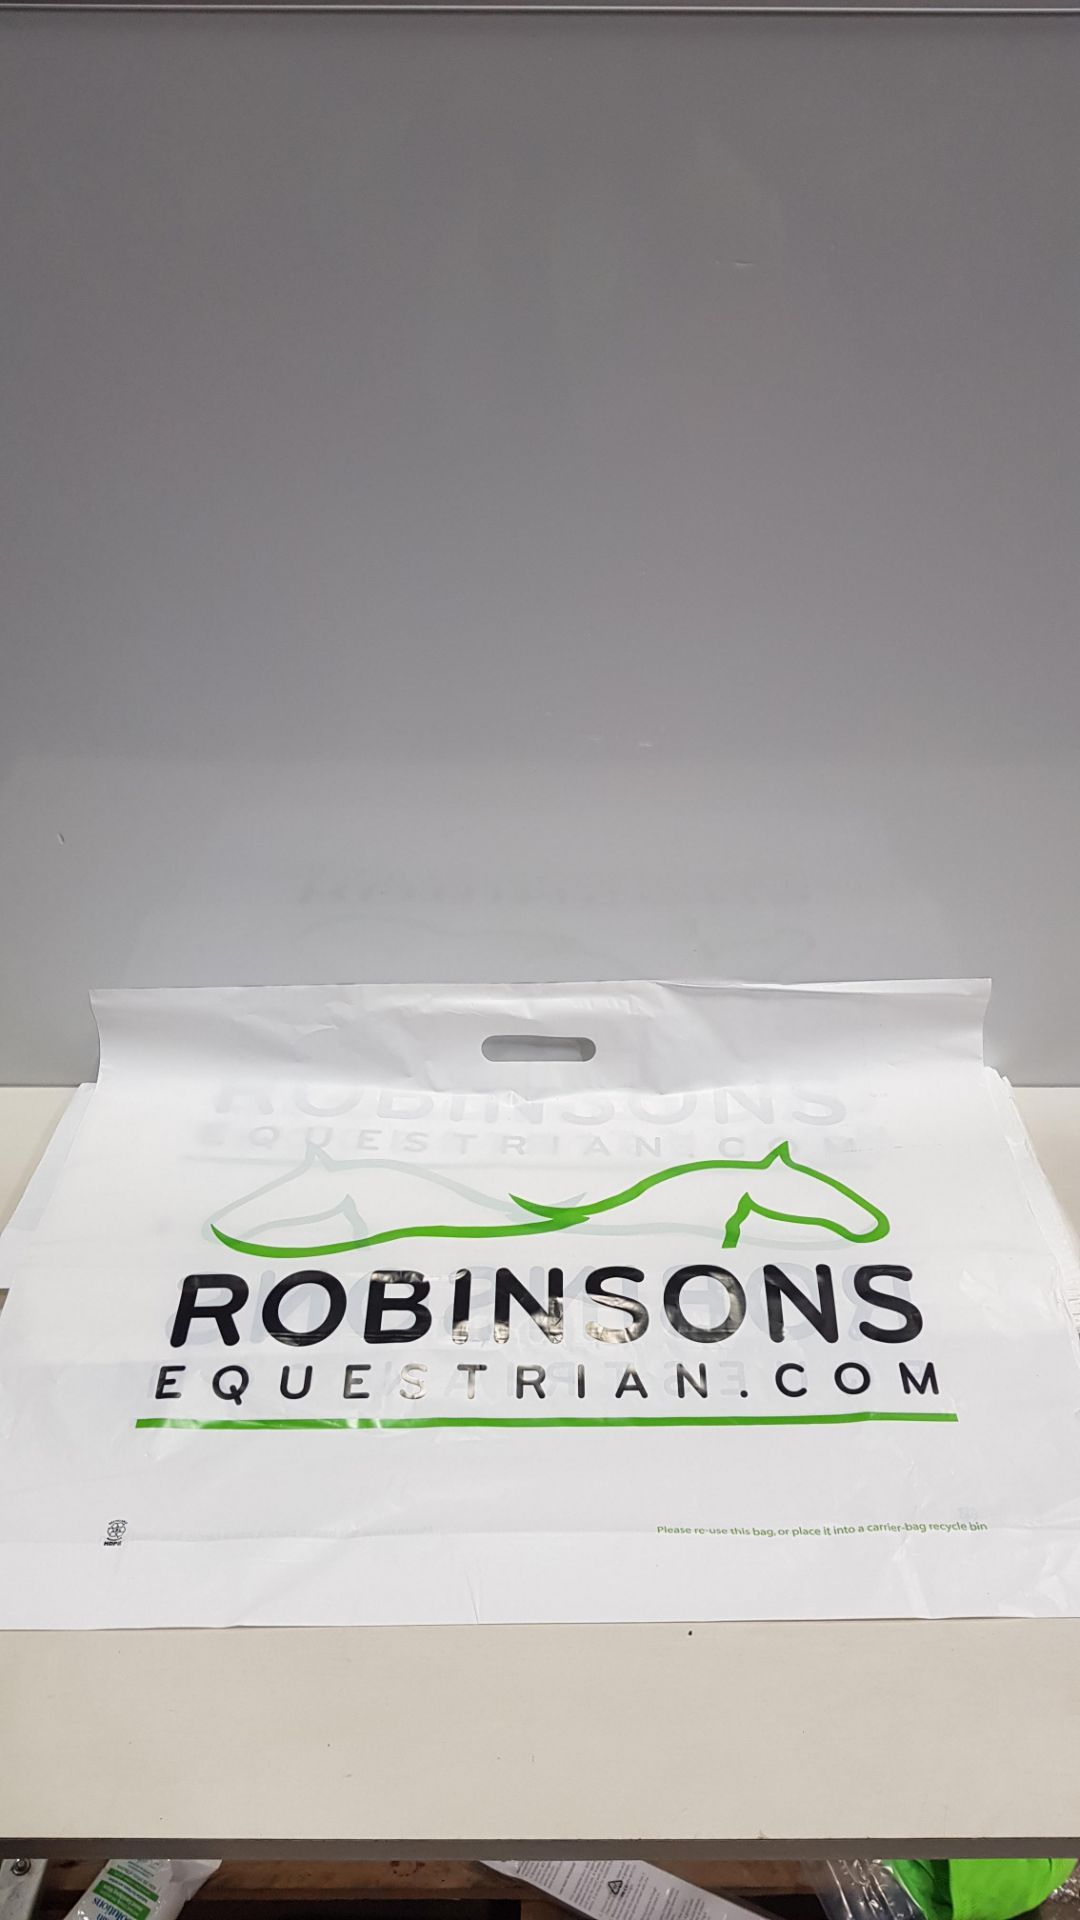 3,000 BRAND NEW PLASTIC BAGS ROBINSONS EQUESTRIAN.COM 70 X 50CM.IN 12 BOXES